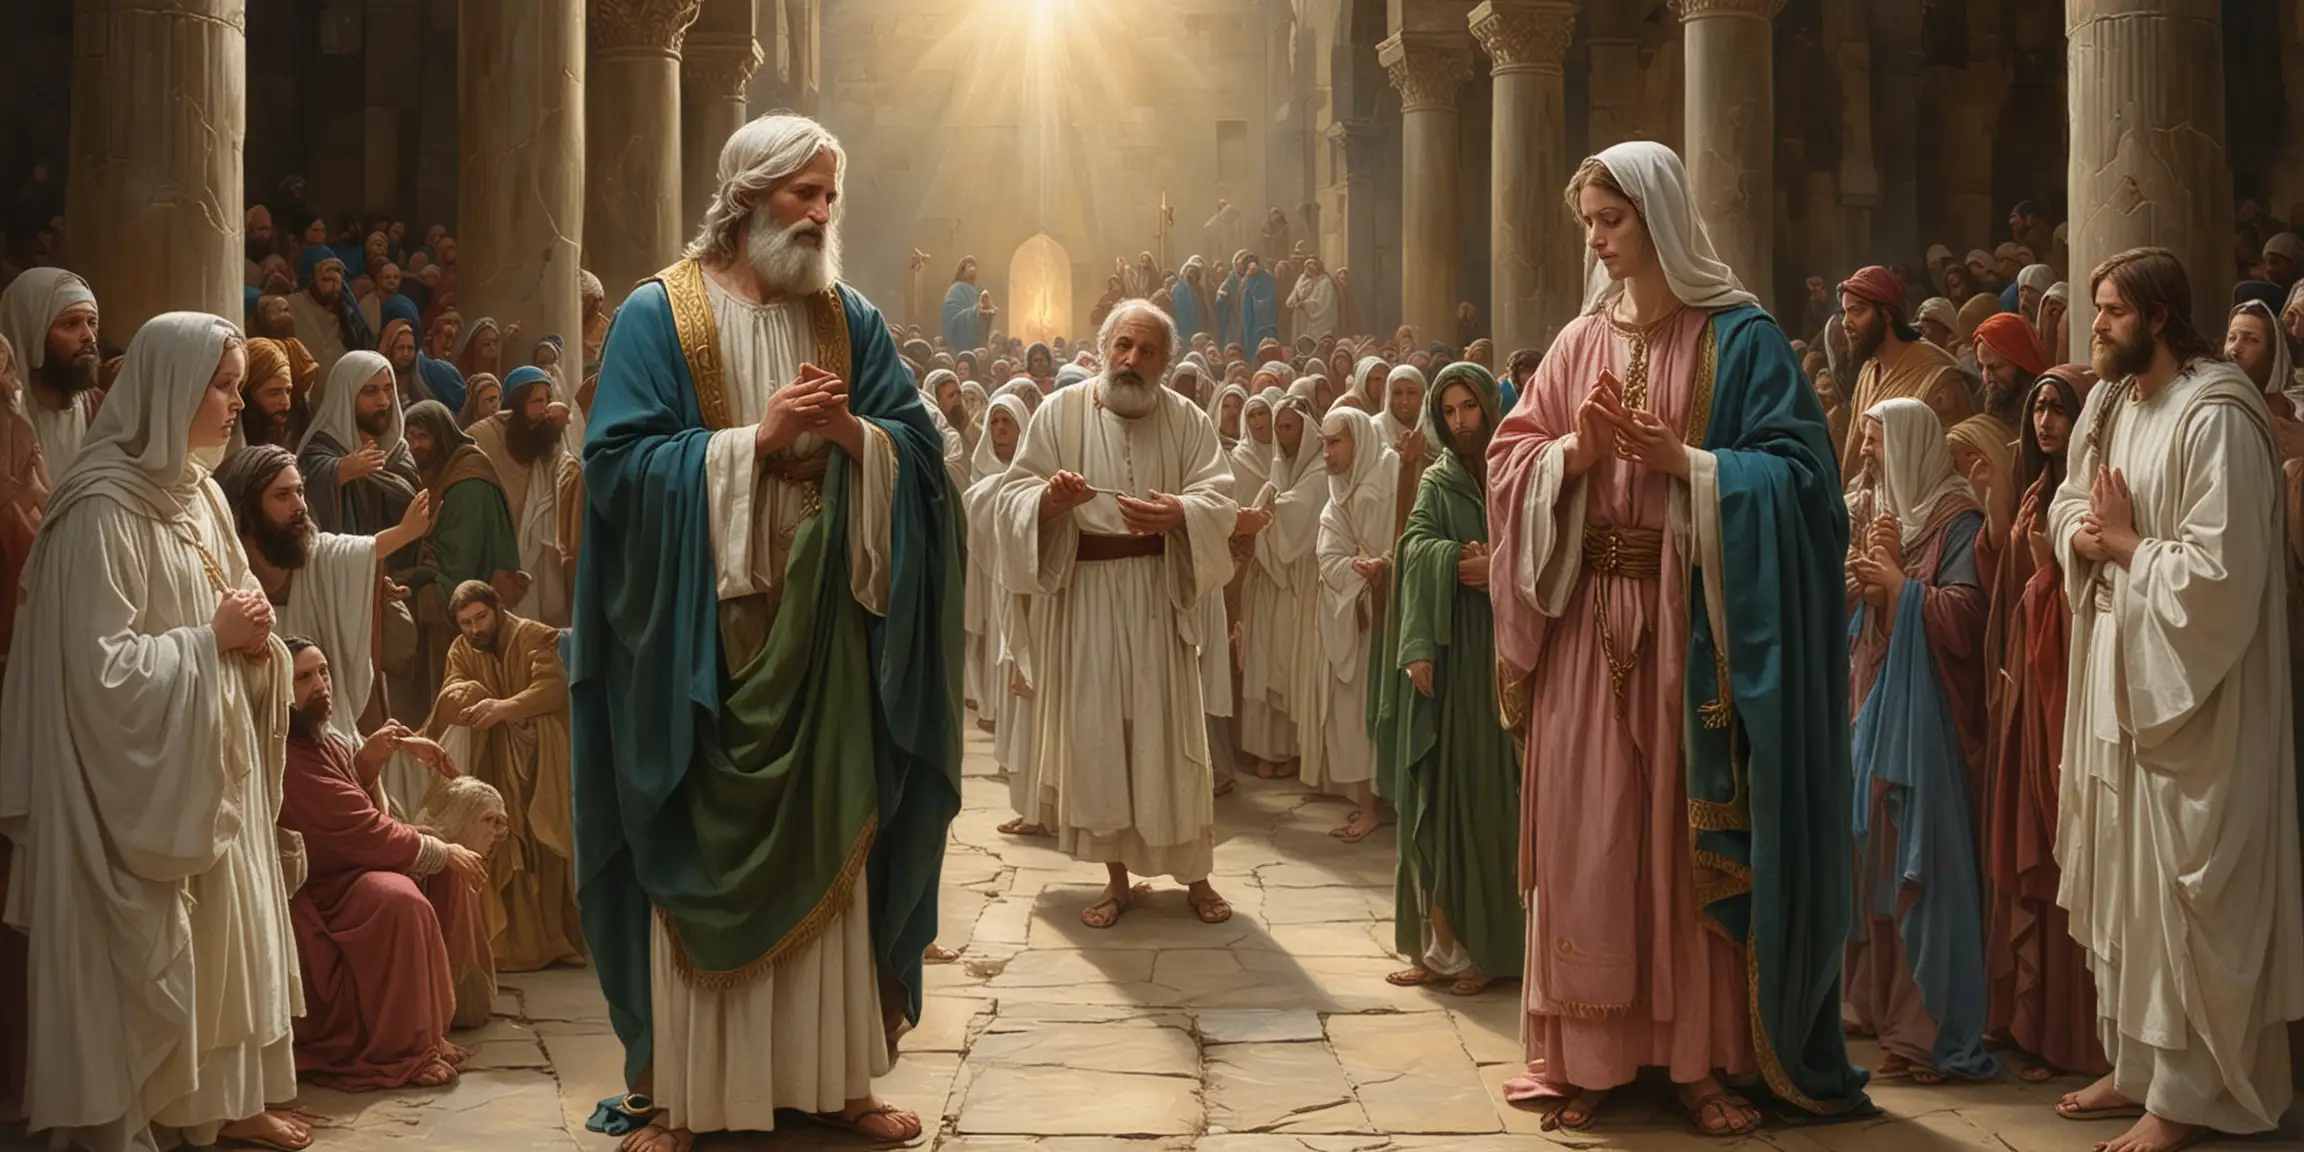 The painting depicts the Presentation of Jesus at the Temple, a significant event in the Christian faith. The scene is set within the temple, suggested by the arched stone doorway and the worn stone walls.

Central Figures:

Simeon: An elderly man with a long white beard, dressed in ornate and colourful Jewish priestly robes, a Jewish mitre on his head and sandals, holds a naked baby in his arms. His expression is one of awe and reverence, suggesting the fulfillment of his prophecy to see the Messiah before his death.

Mary: Dressed in a blue robe and a reddish-pink shawl and sandals, stands to the left of Simeon. Her hands are clasped, and her gaze is directed towards Jesus with a mix of love and apprehension.

Joseph: Standing behind Mary, Joseph is depicted as a young twenty-five year-old man with a beard, wearing a green robe and a brown cloak and sandals. He holds two turtledoves in a cage, the offering of the poor, symbolizing the family's humble status.

Anna the Prophetess: An elderly woman dressed in dark robes stands to the right of Simeon, her hands clasped in prayer. Her presence signifies the recognition of Jesus as the Messiah by devout individuals.
Additional Details:

The Temple Setting: The background features a group of men, possibly other priests or Levites, observing the event. The warm, earthy tones of the painting and the play of light and shadow create a sense of solemnity and reverence.
Symbolism: The white cloth with gold trim that Simeon holds Jesus in represents the baby's purity and divinity. The turtledoves held by Joseph symbolize sacrifice and purification.
Overall Impression:

The painting captures the emotional intensity and spiritual significance of the Presentation of Jesus at the Temple. The expressions of the figures, the symbolism, and the setting all contribute to a powerful depiction of this pivotal event in the life of Jesus.